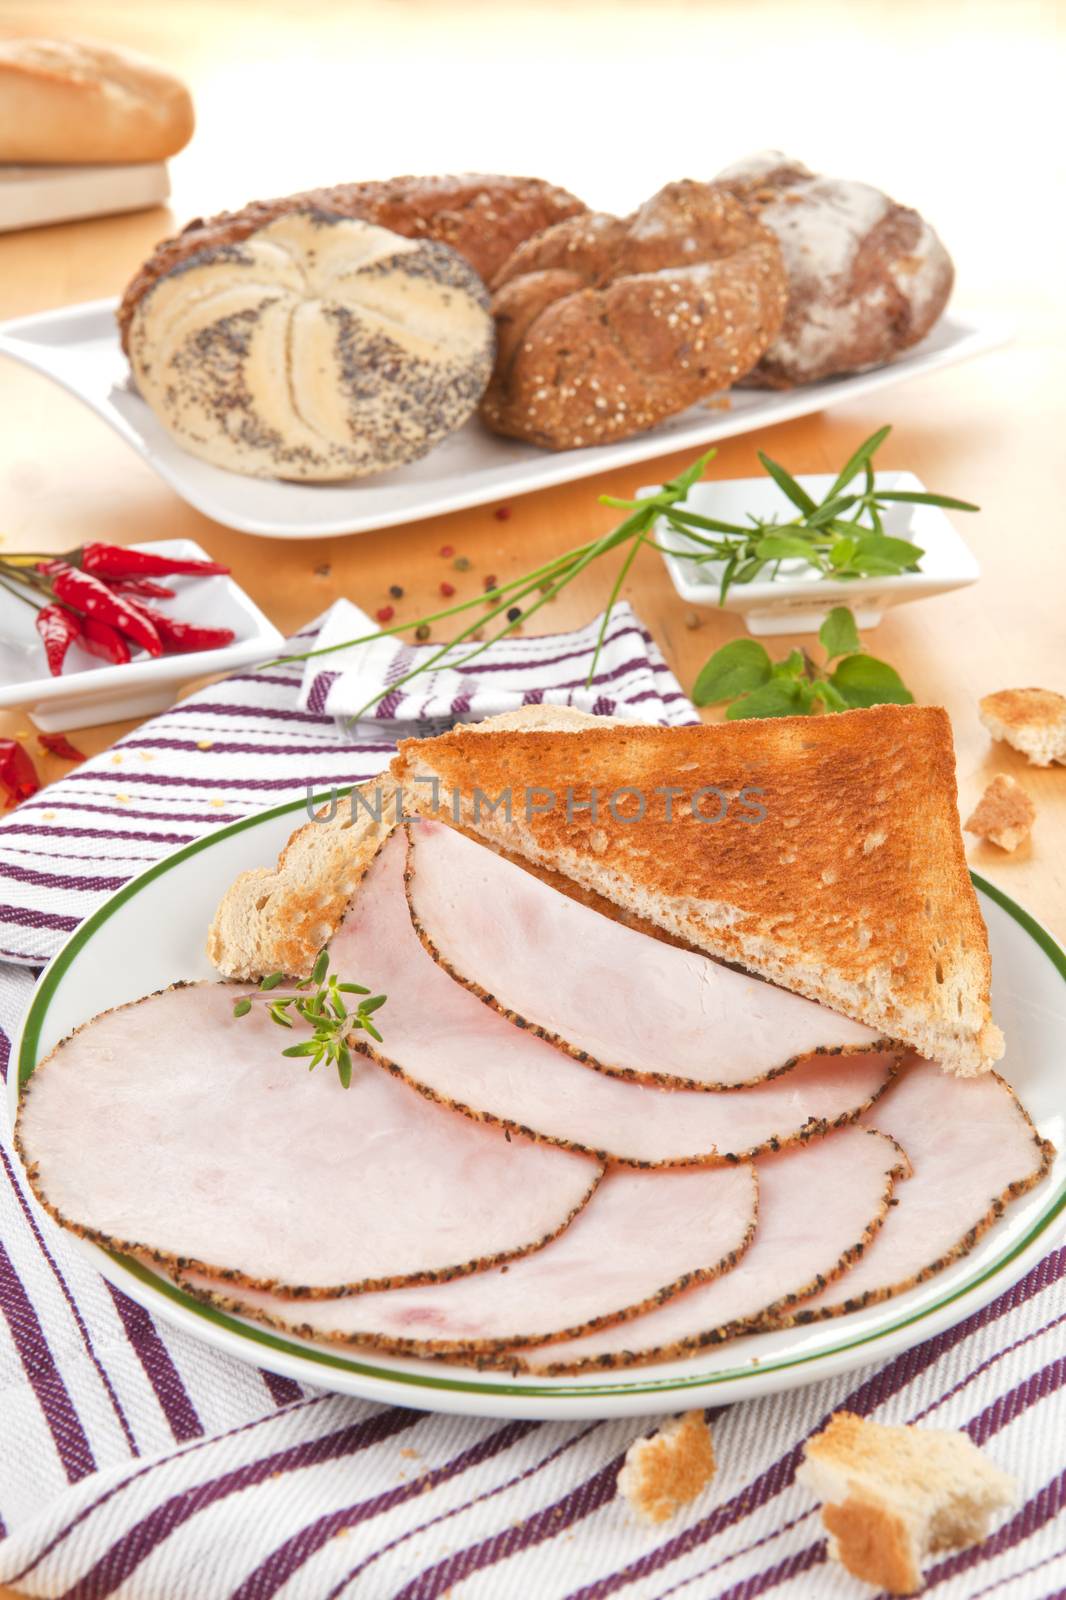 Turkey ham slices with bread. by eskymaks